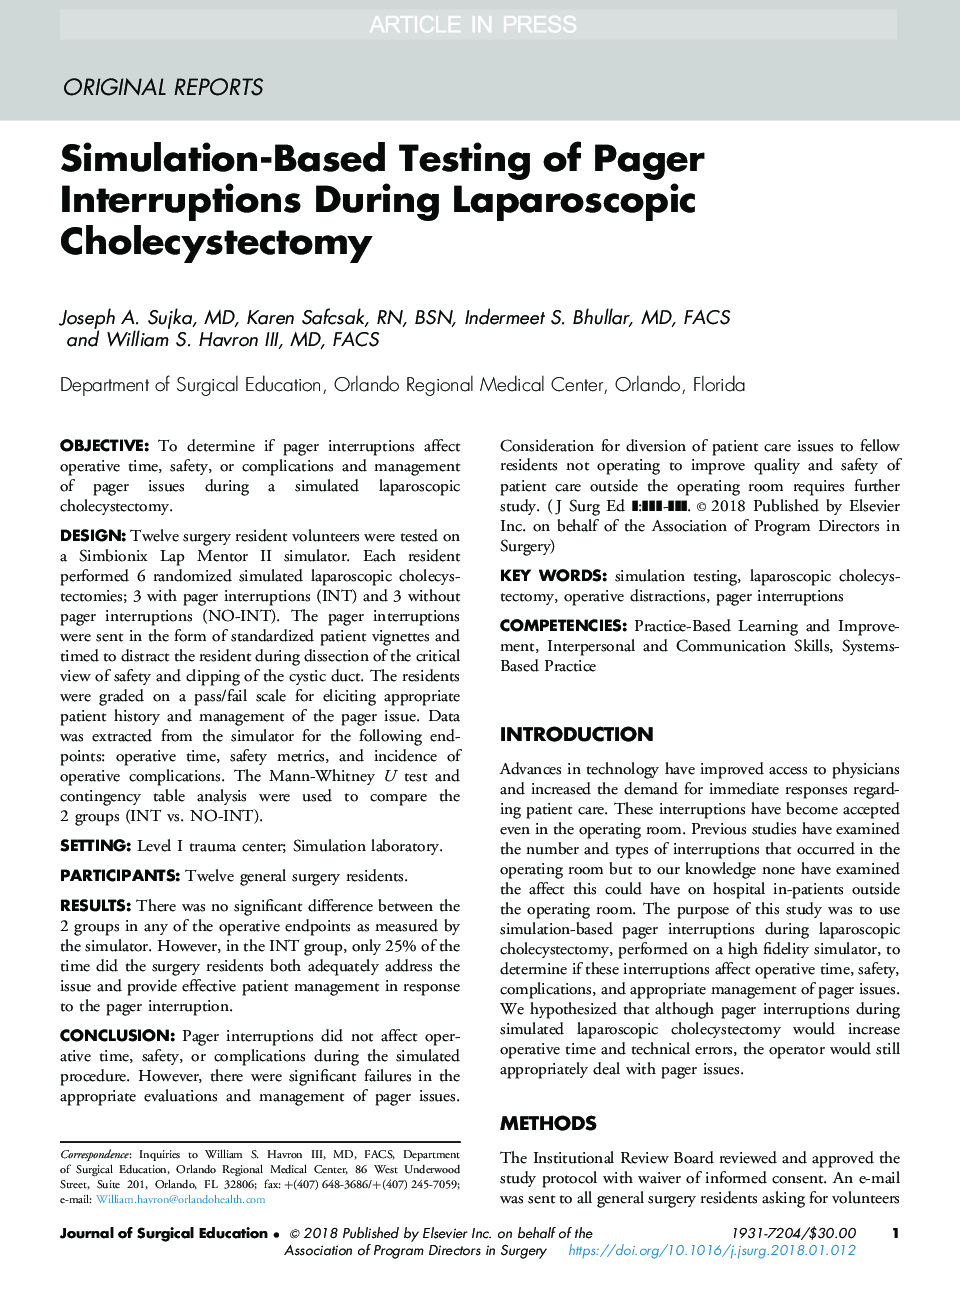 Simulation-Based Testing of Pager Interruptions During Laparoscopic Cholecystectomy